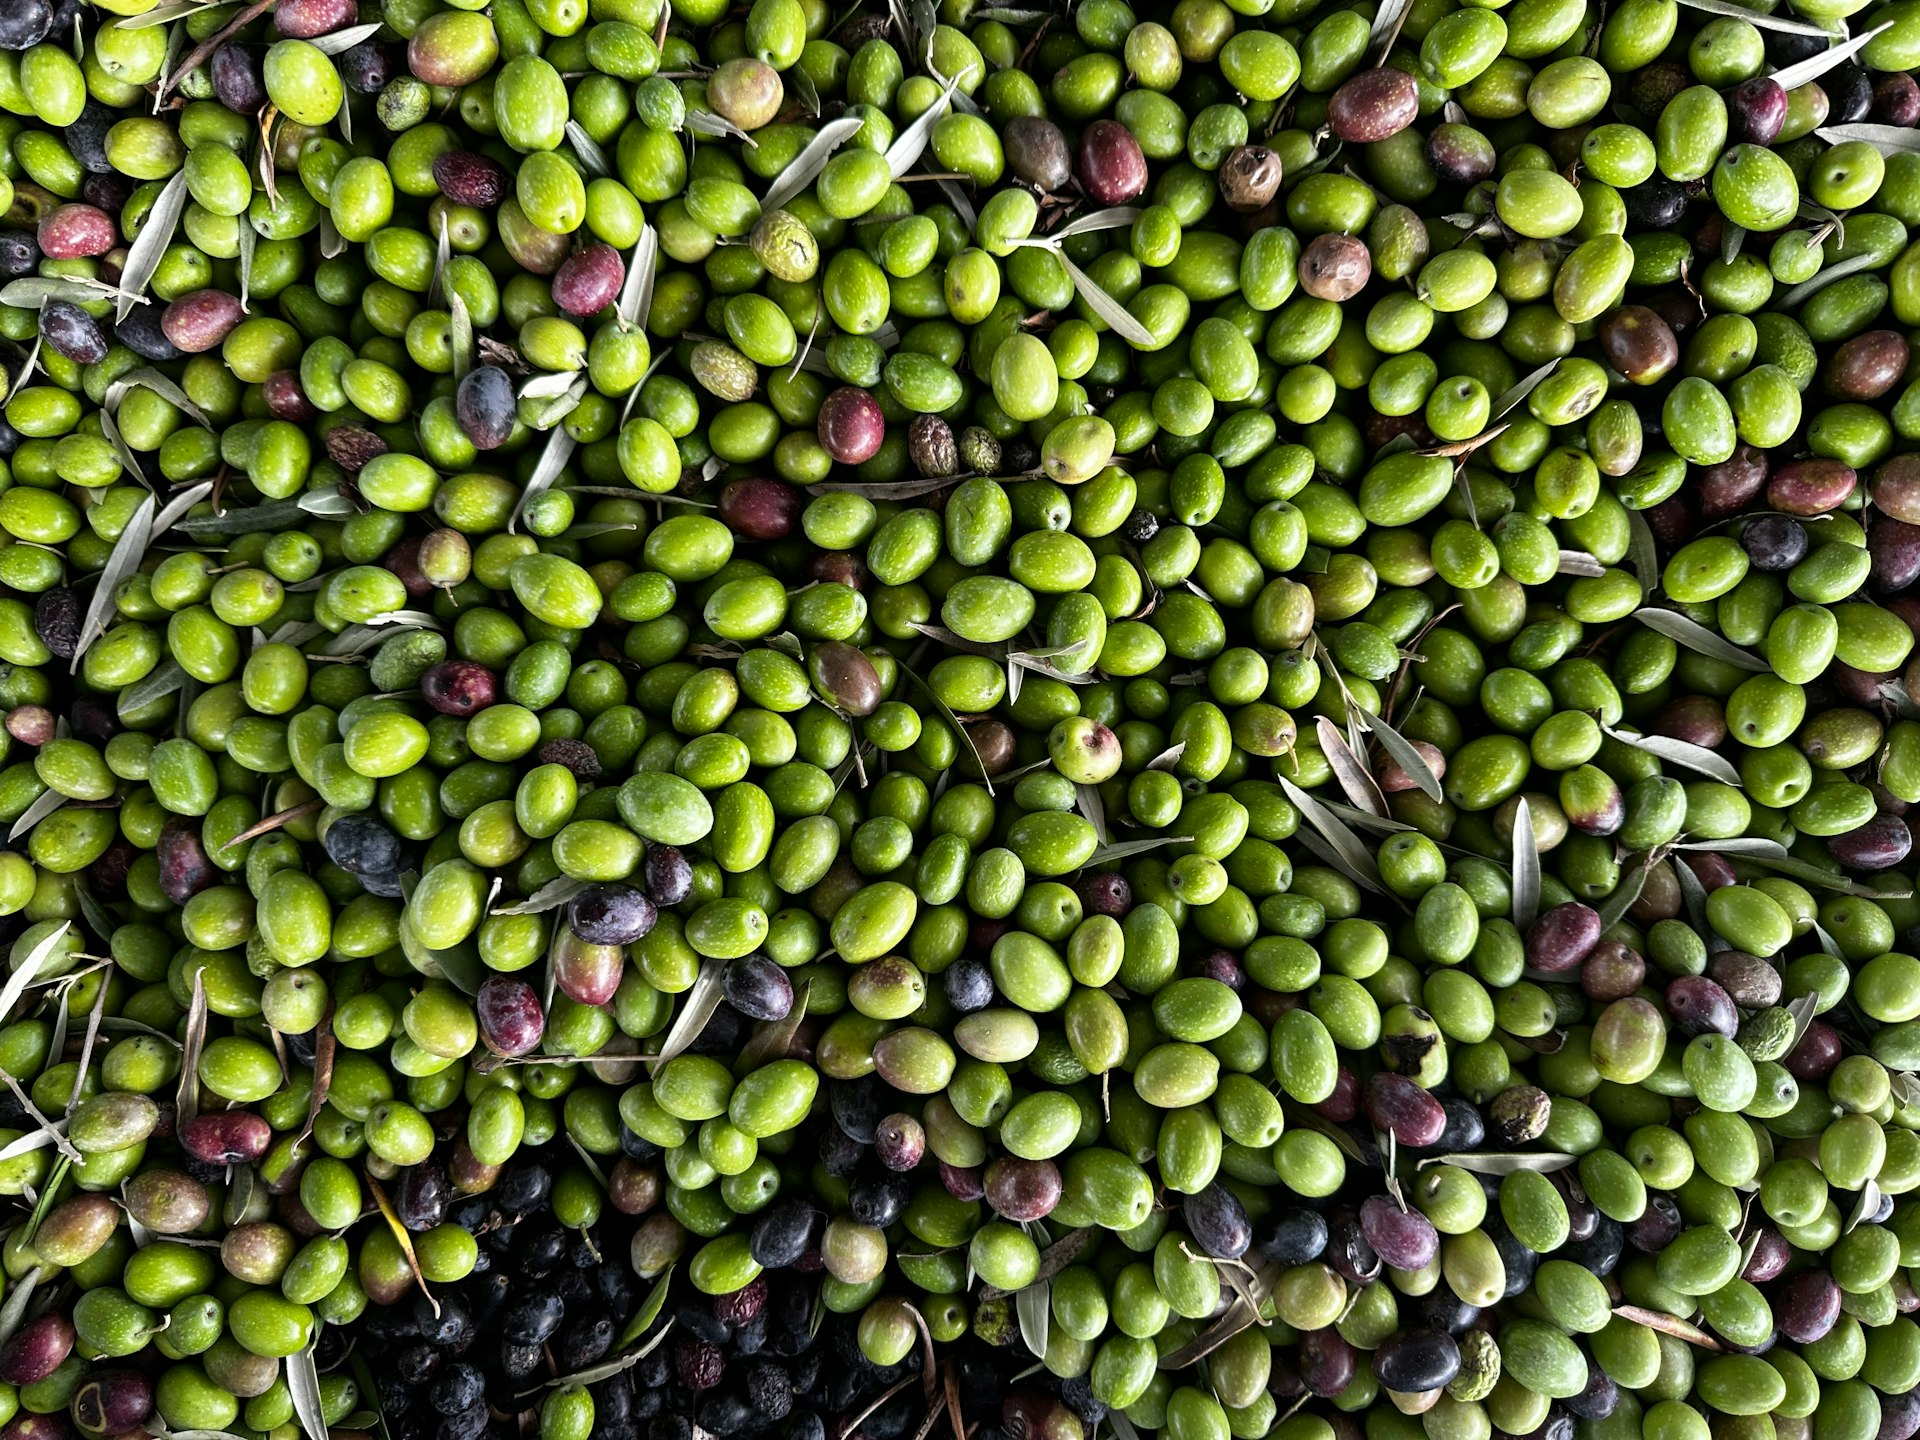 a large pile of olives and other fruits